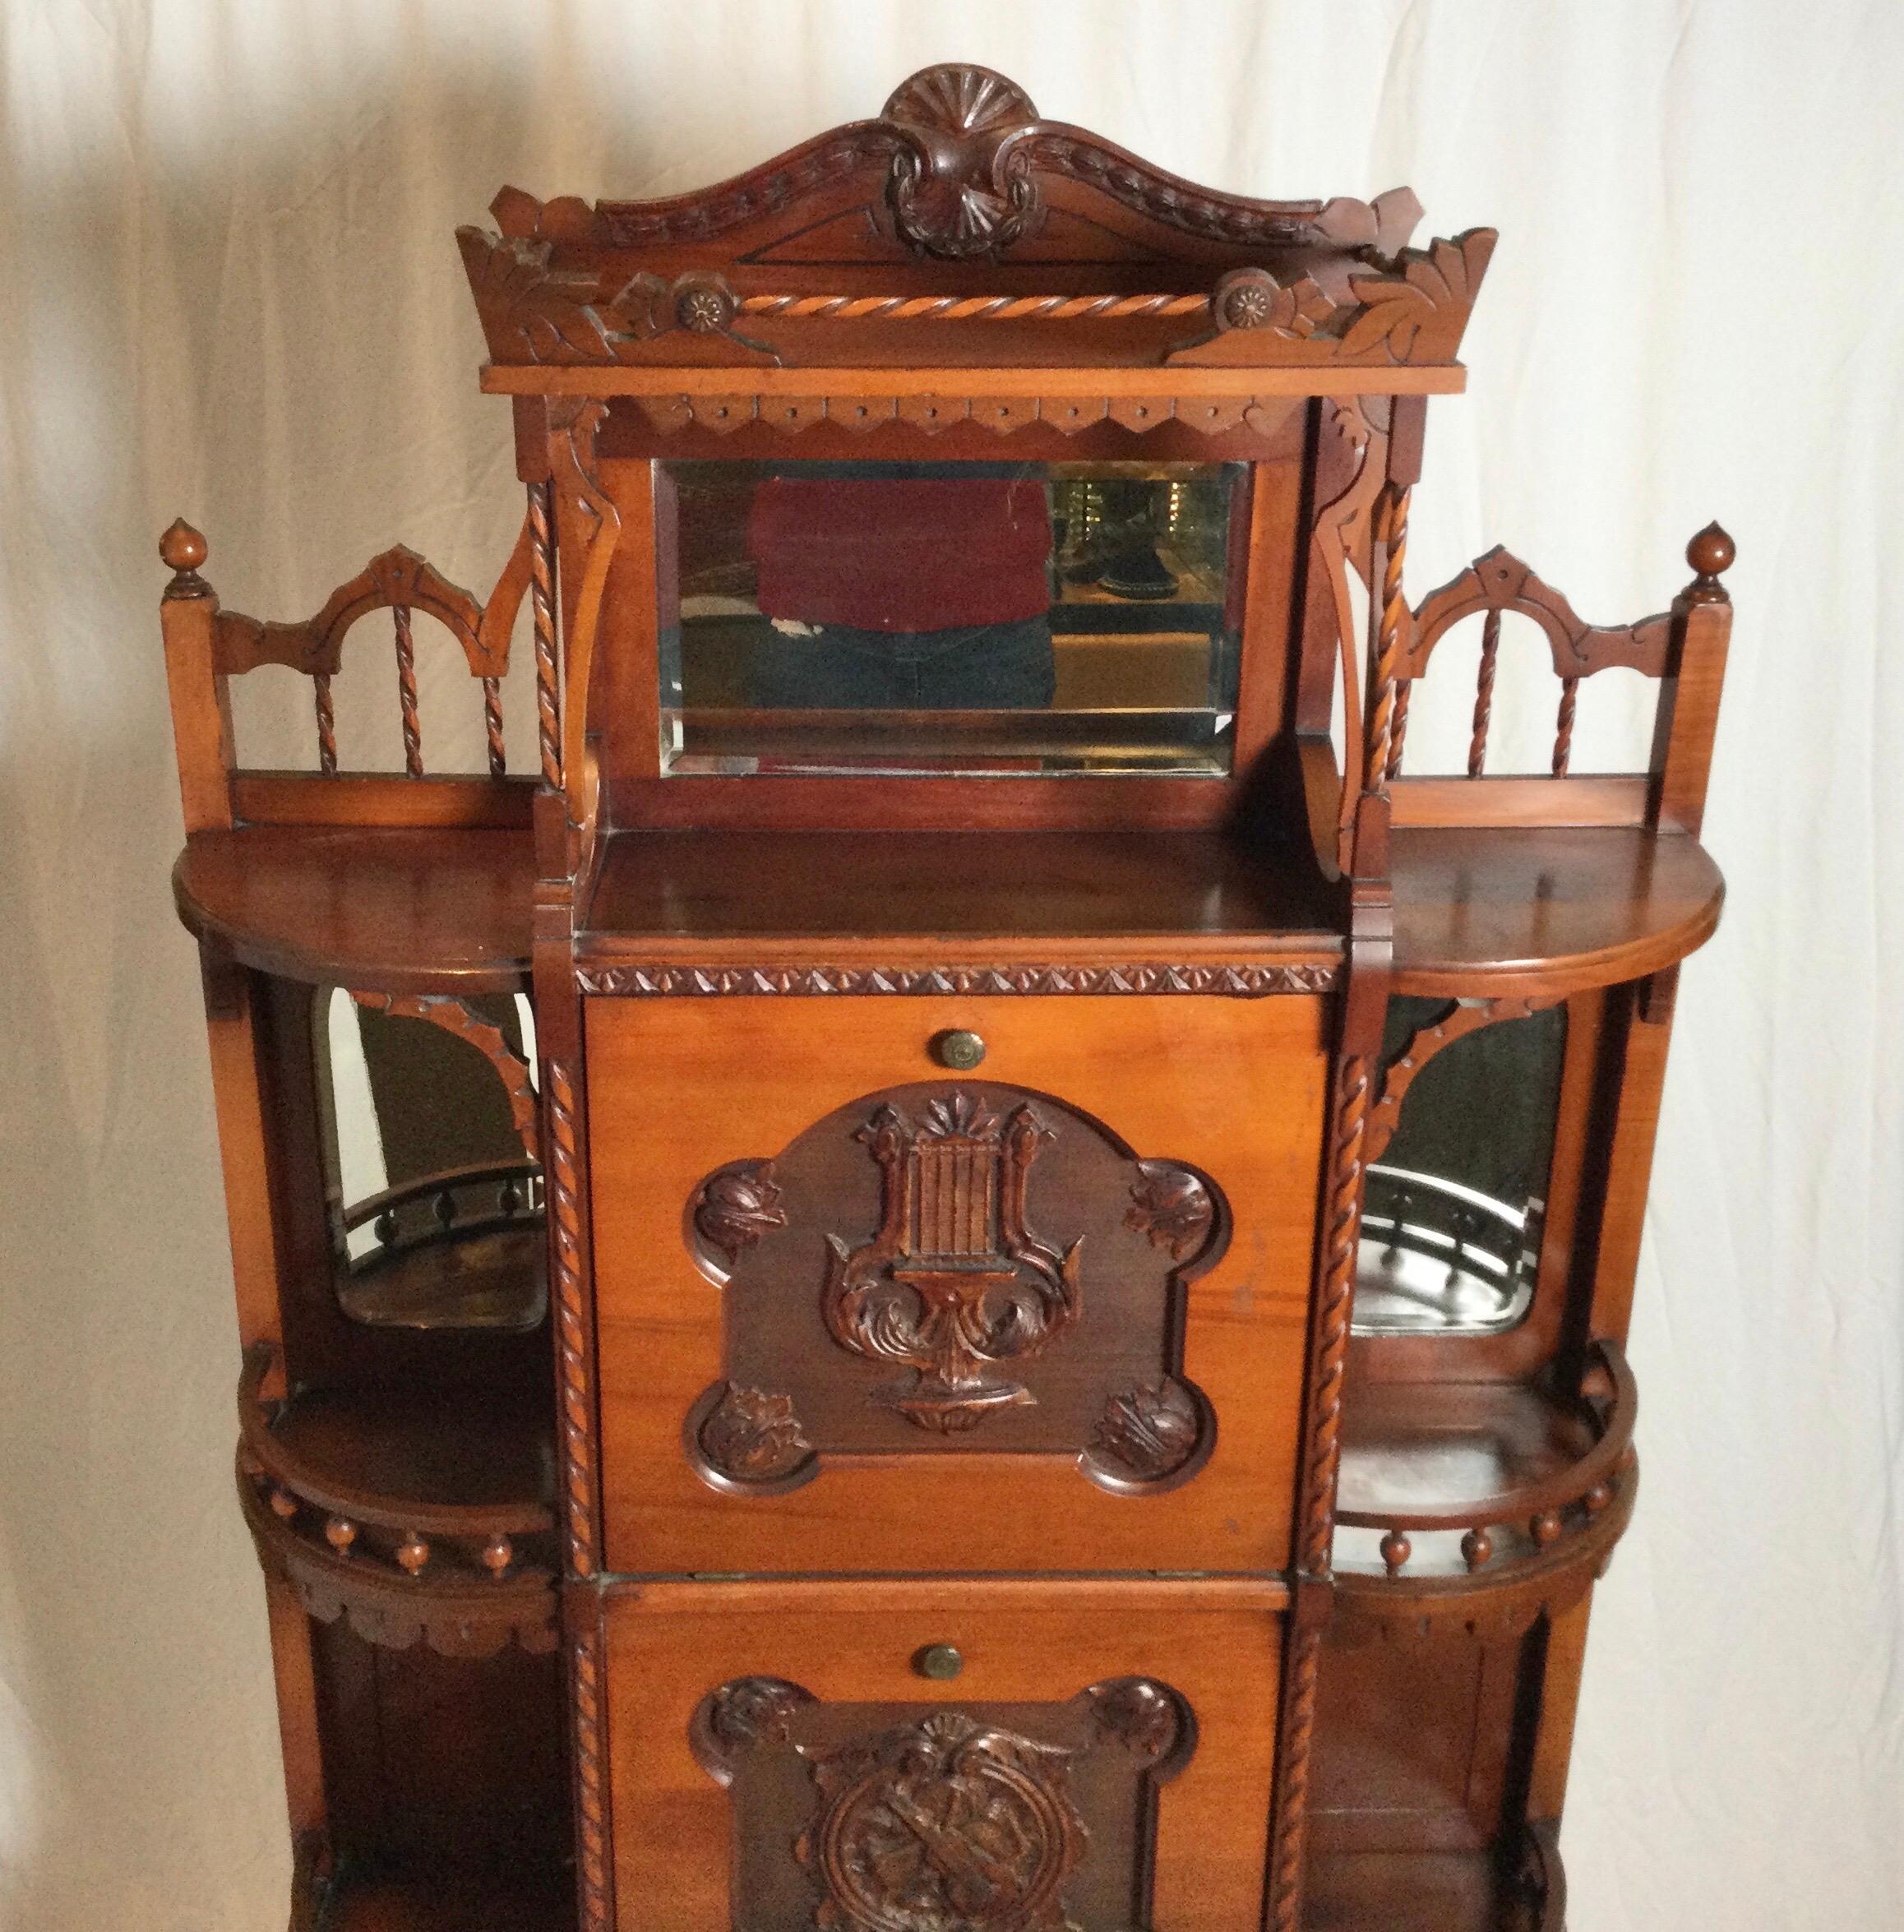 Elaborate design Antique music cabinet with two pull drawers that hold sheet music. The fronts with hand carved violin and lyre design. The open etagere sides with mirrored panels.